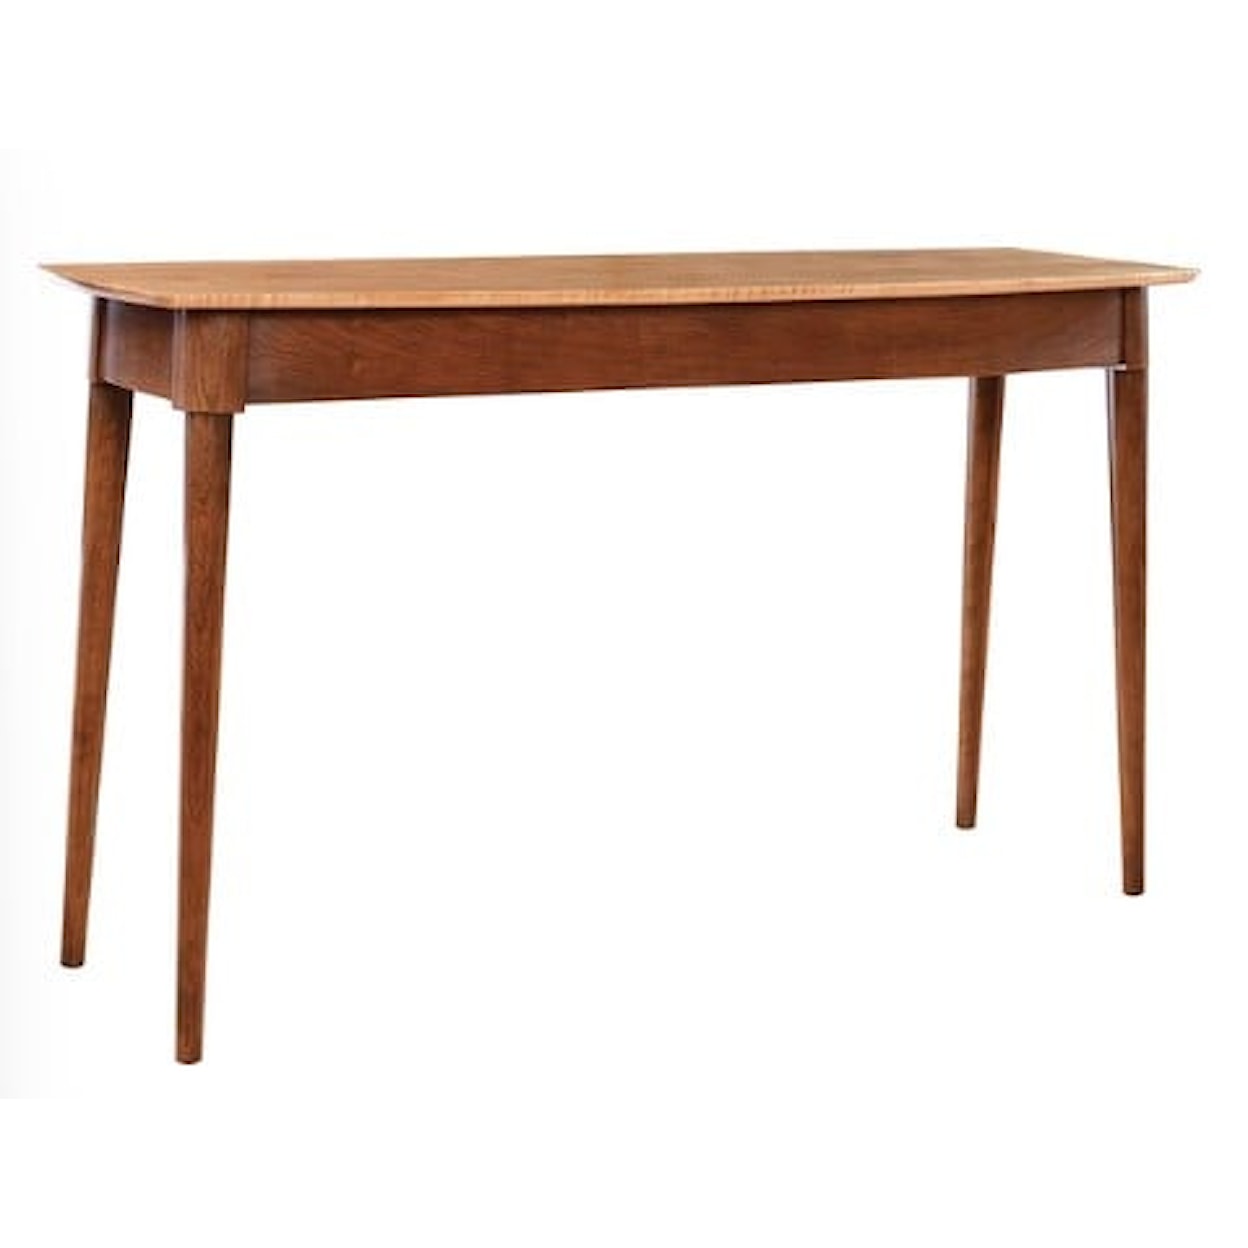 Stickley Nichols and Stone Collection CANTERBURY SOFA TABLE